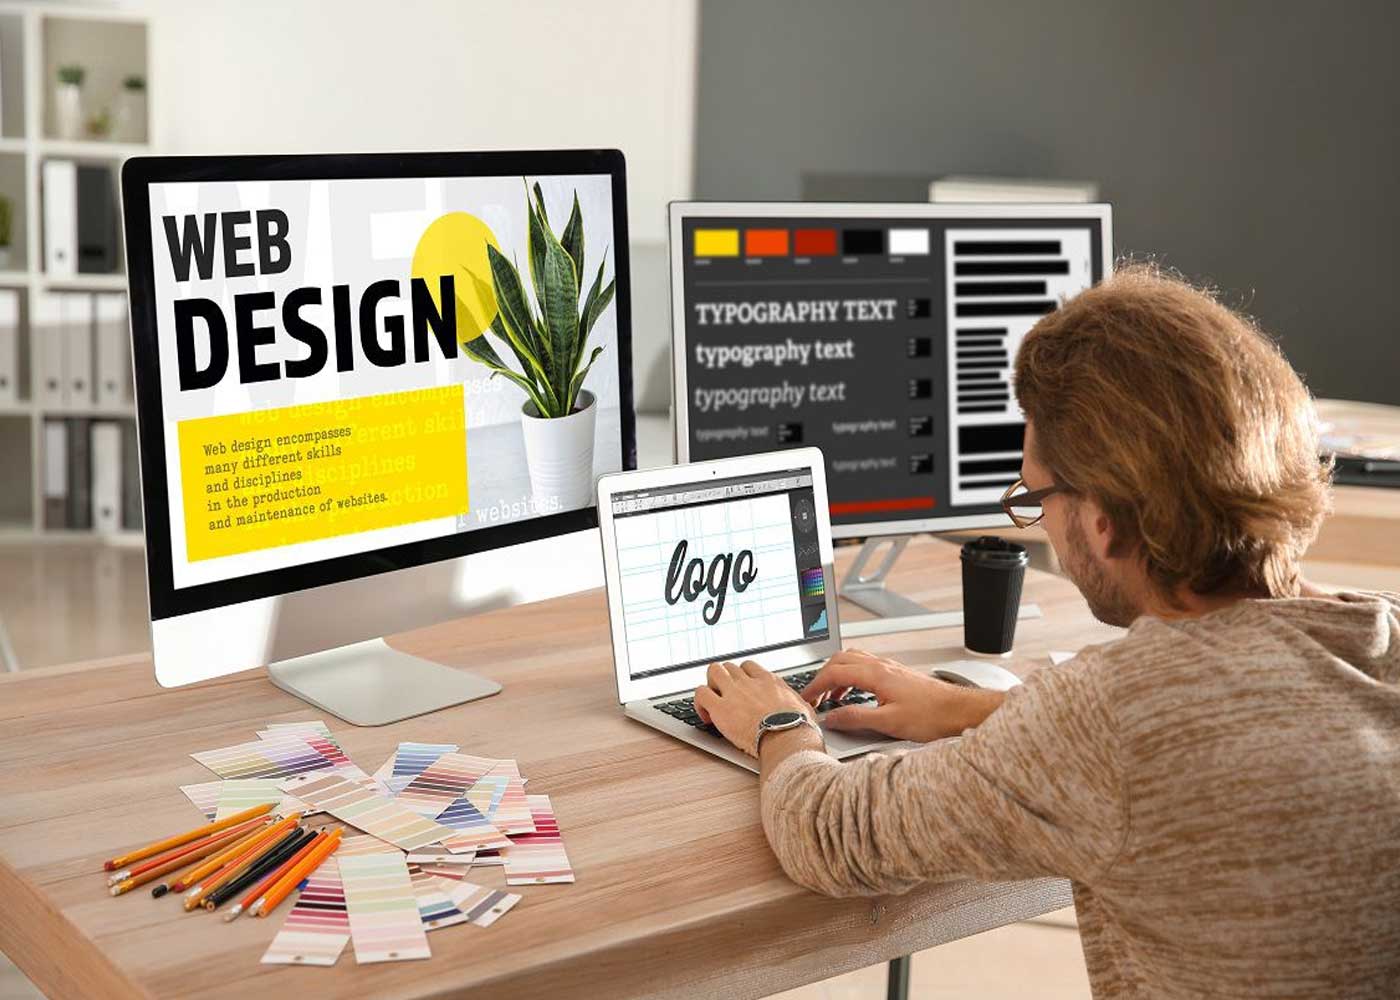 Free and Open-Source Design Tools for Web Designers